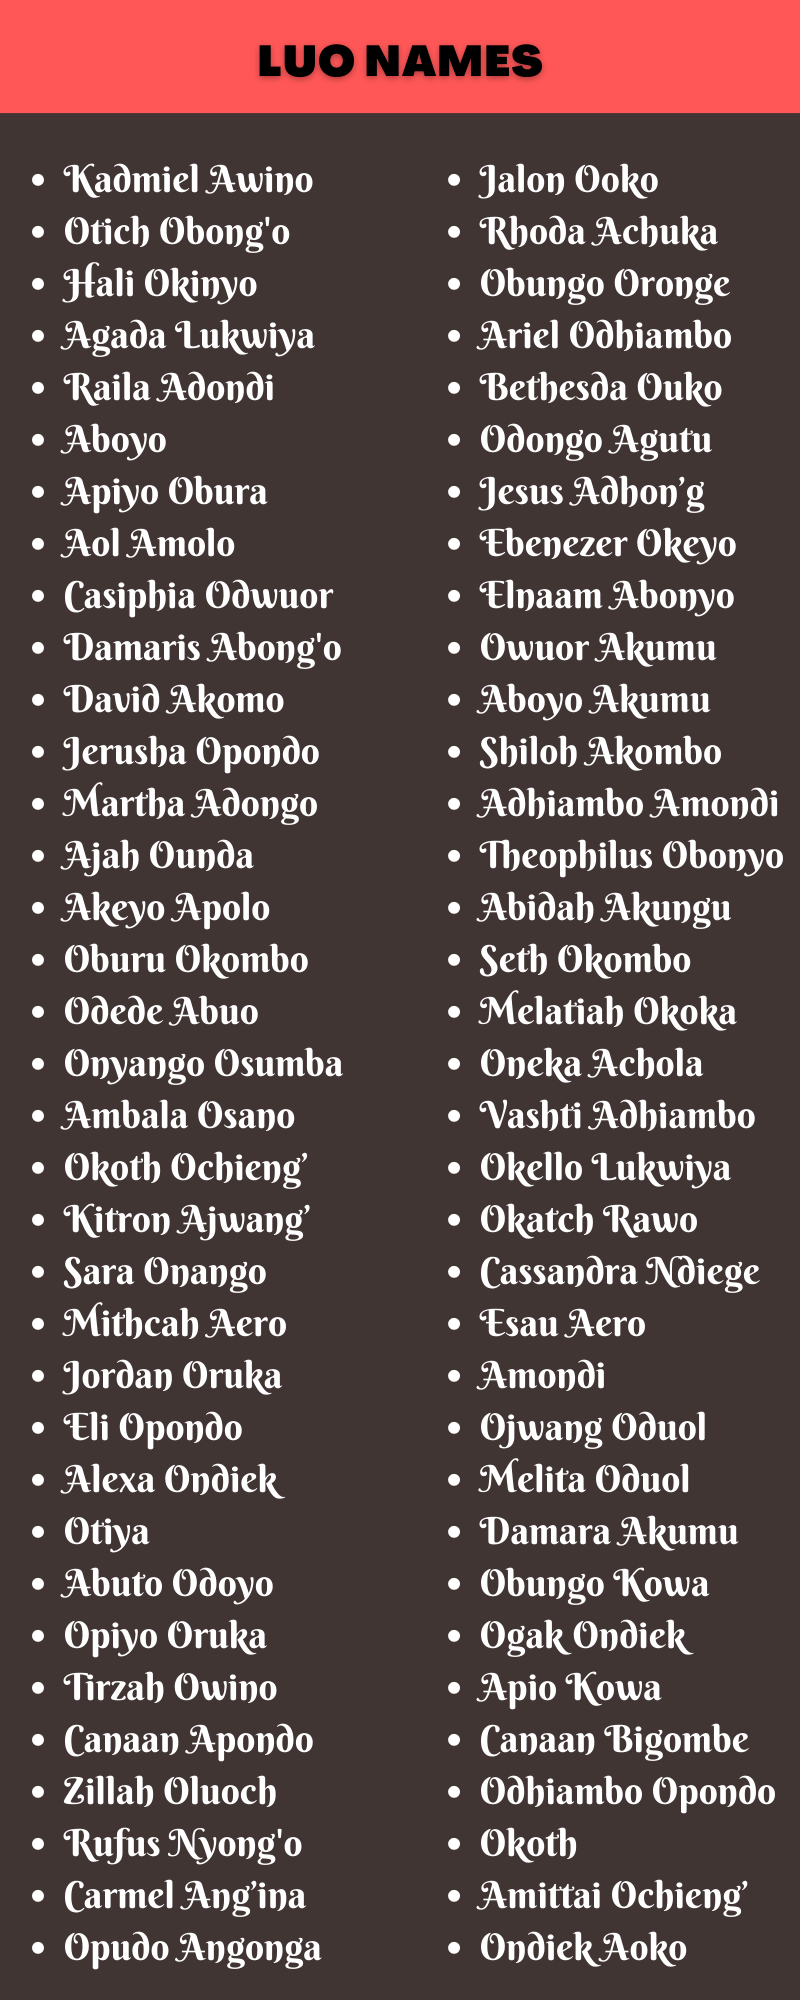 Luo Names